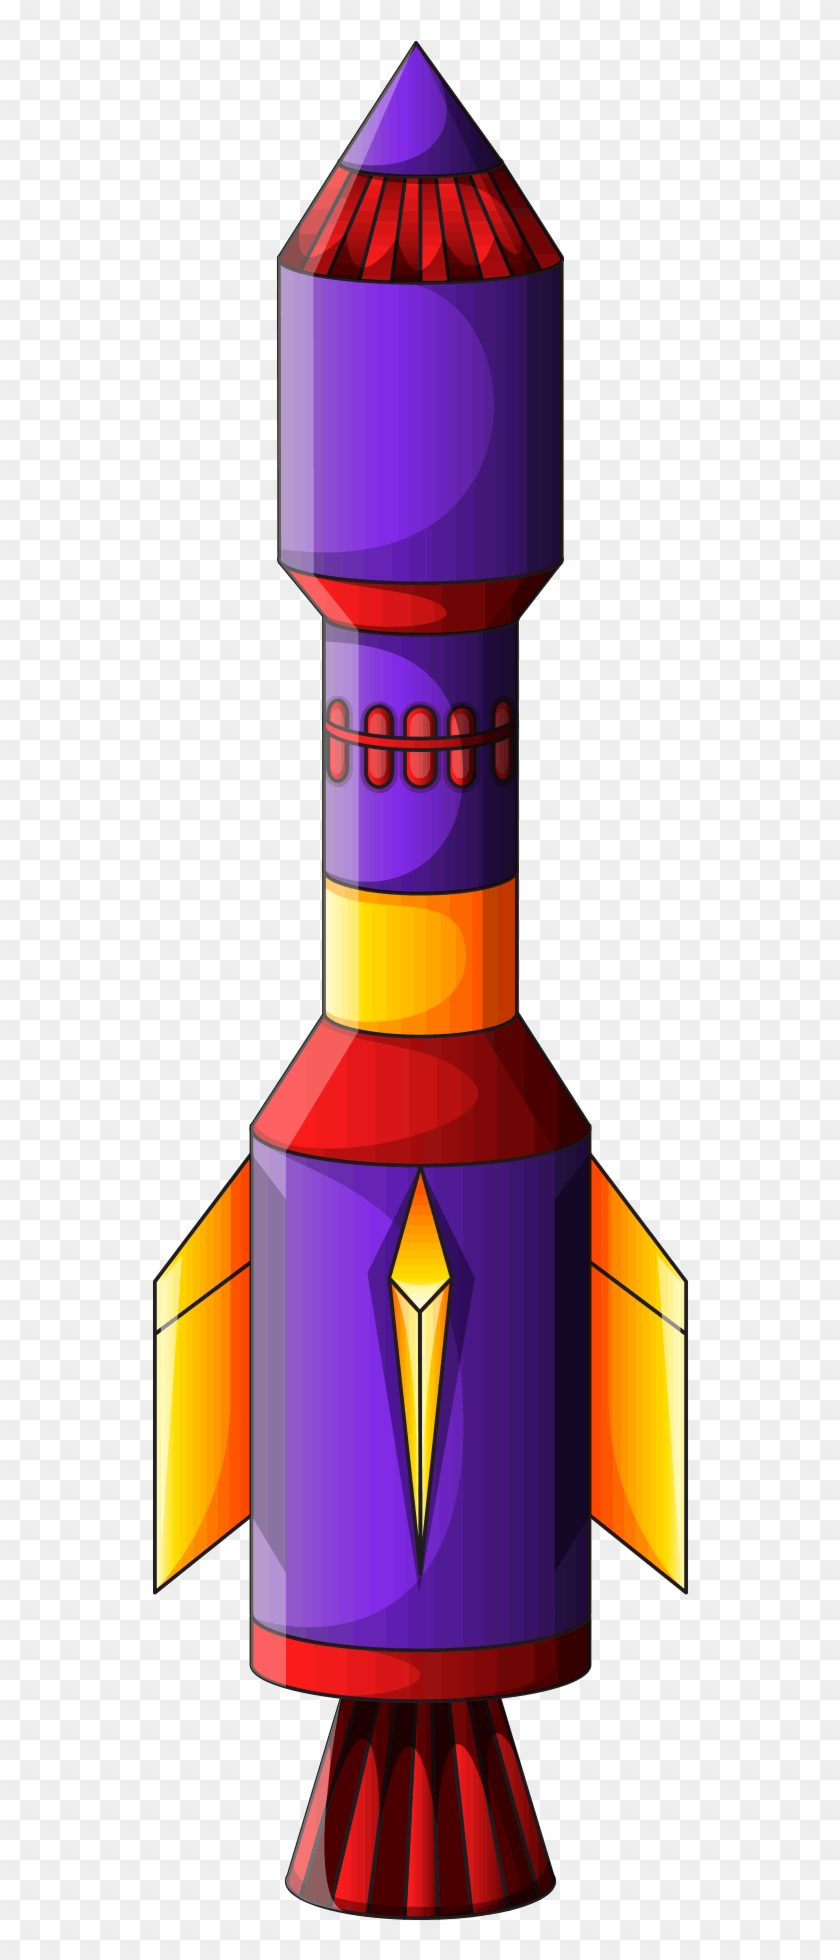 Download - Cartoon Missile Png, Transparent Png - 2048x2048(#455352) -  PngFind